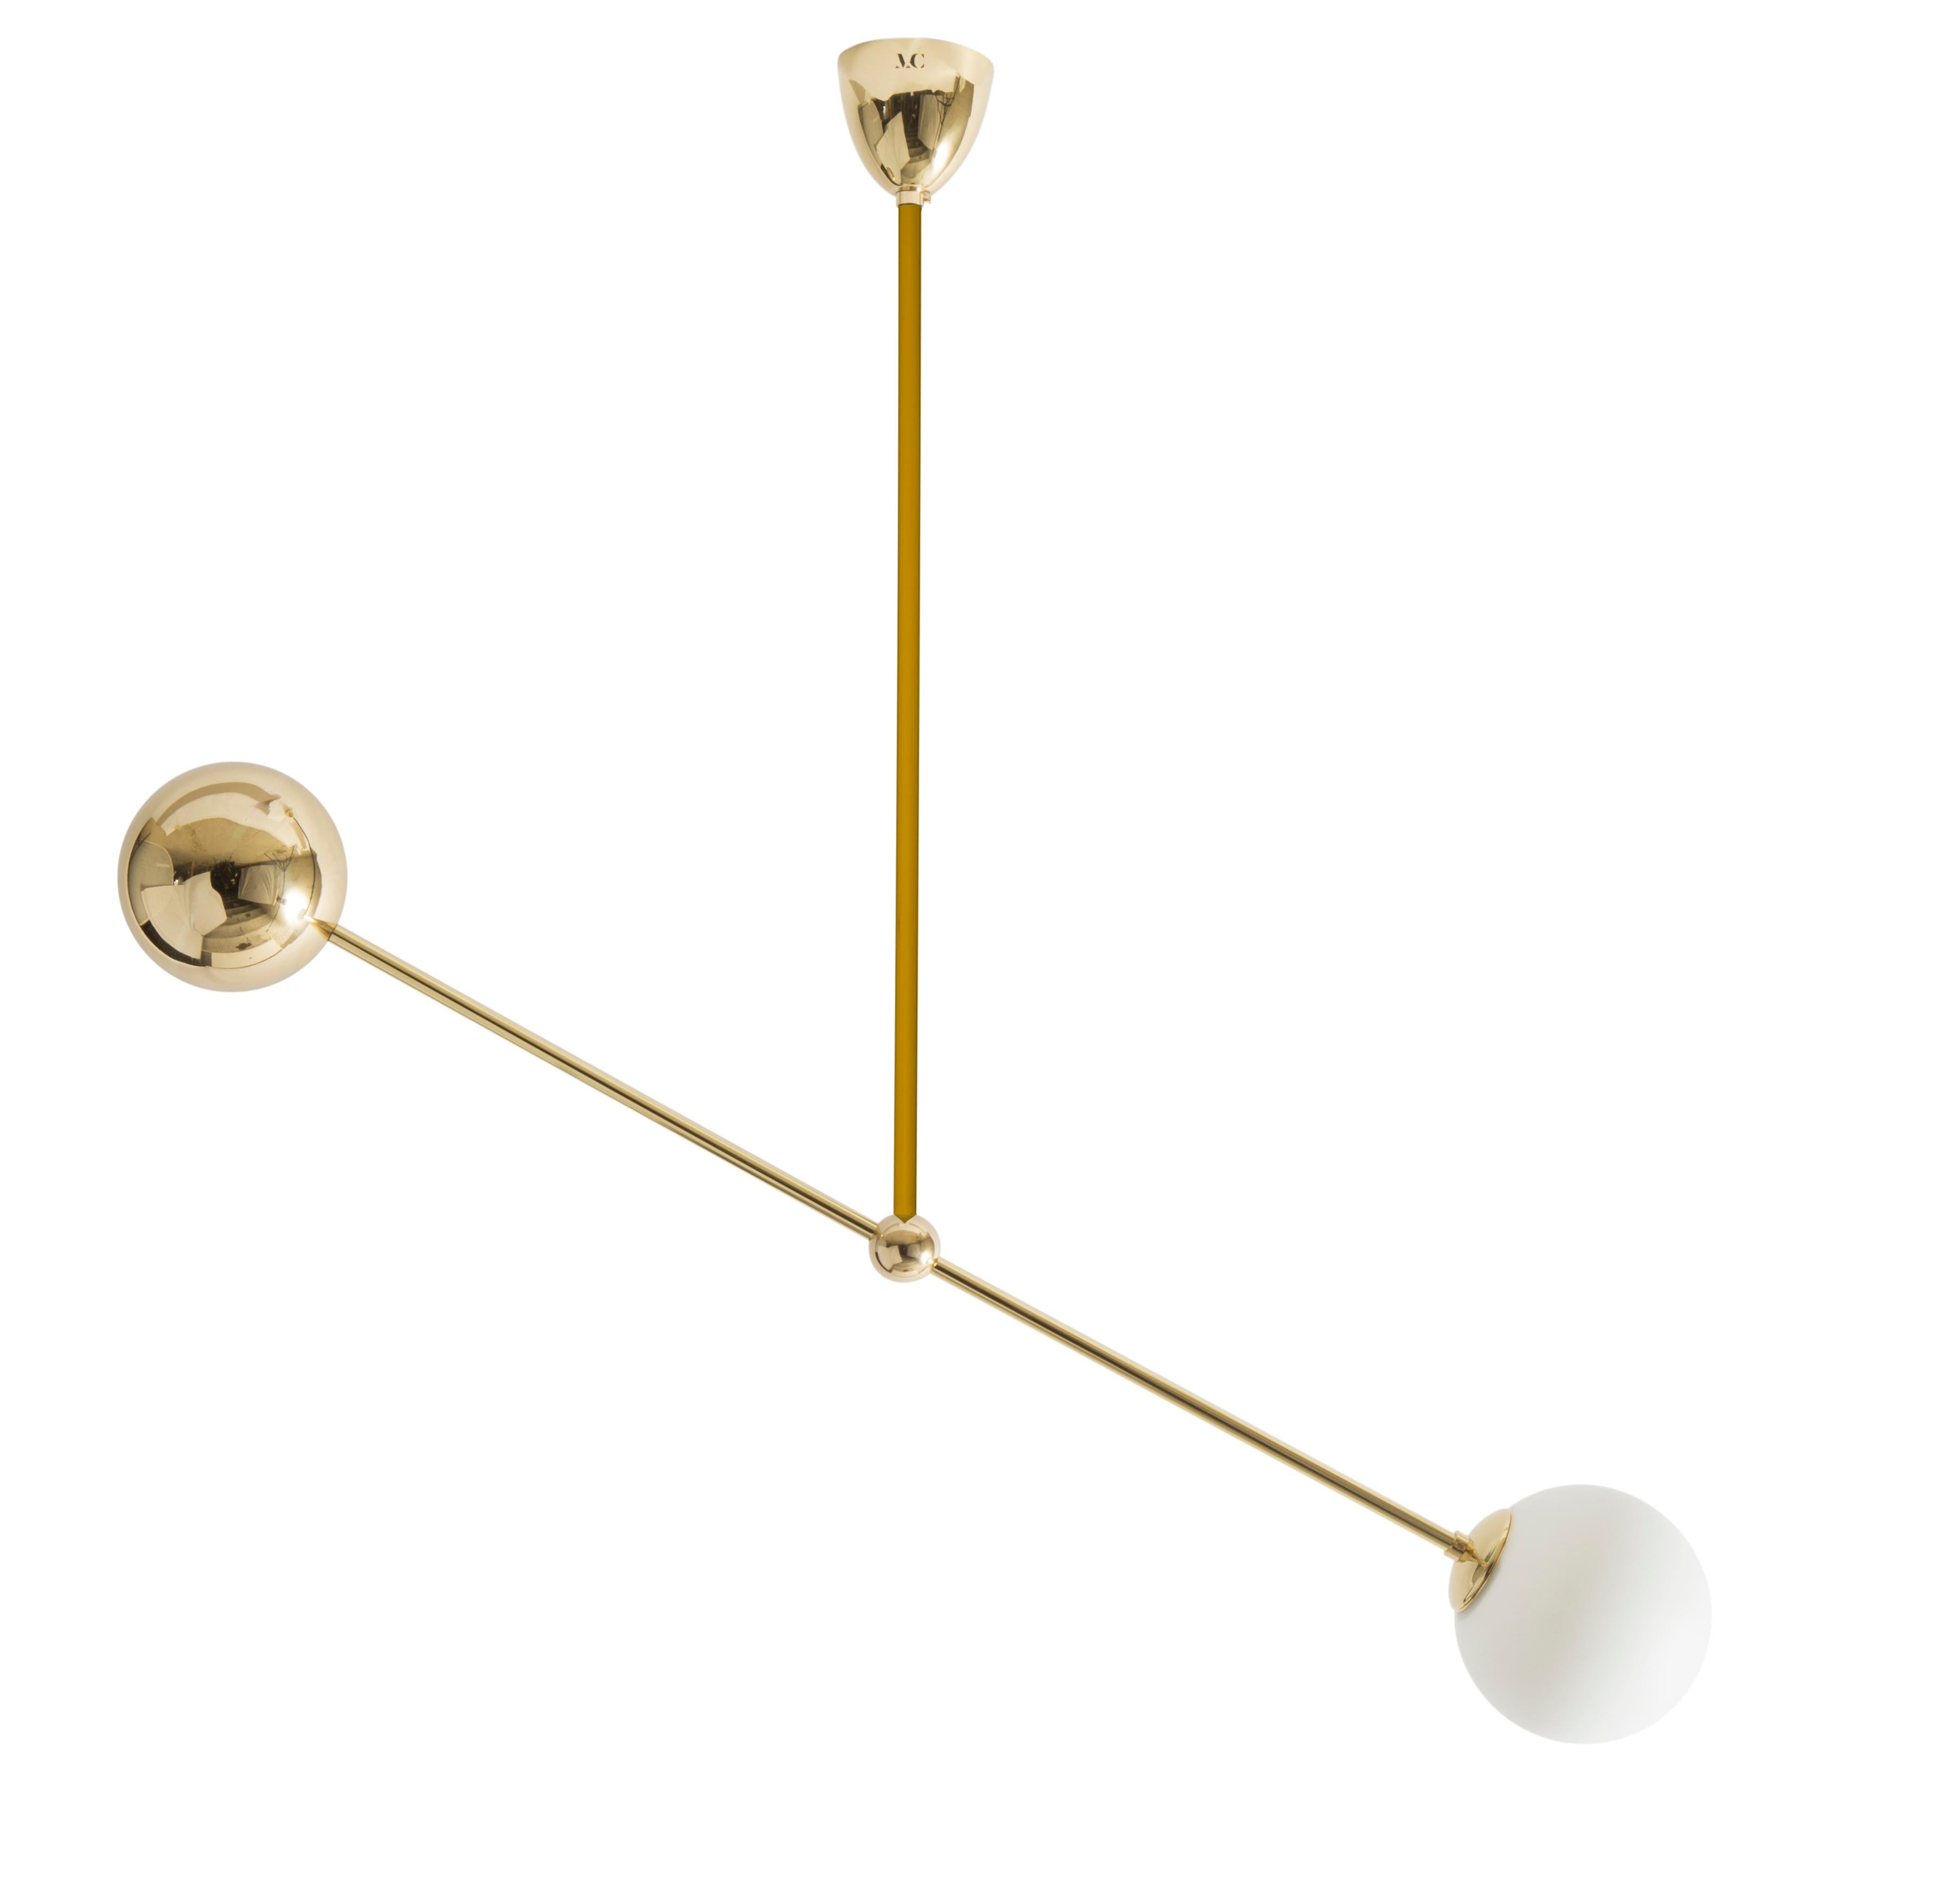 Papyrus chandelier 03 by Magic Circus Editions
Dimensions: W 111 x H 120 cm, also available in H 170, 220
Materials: Brass, mouth blown glass

All our lamps can be wired according to each country. If sold to the USA it will be wired for the USA for